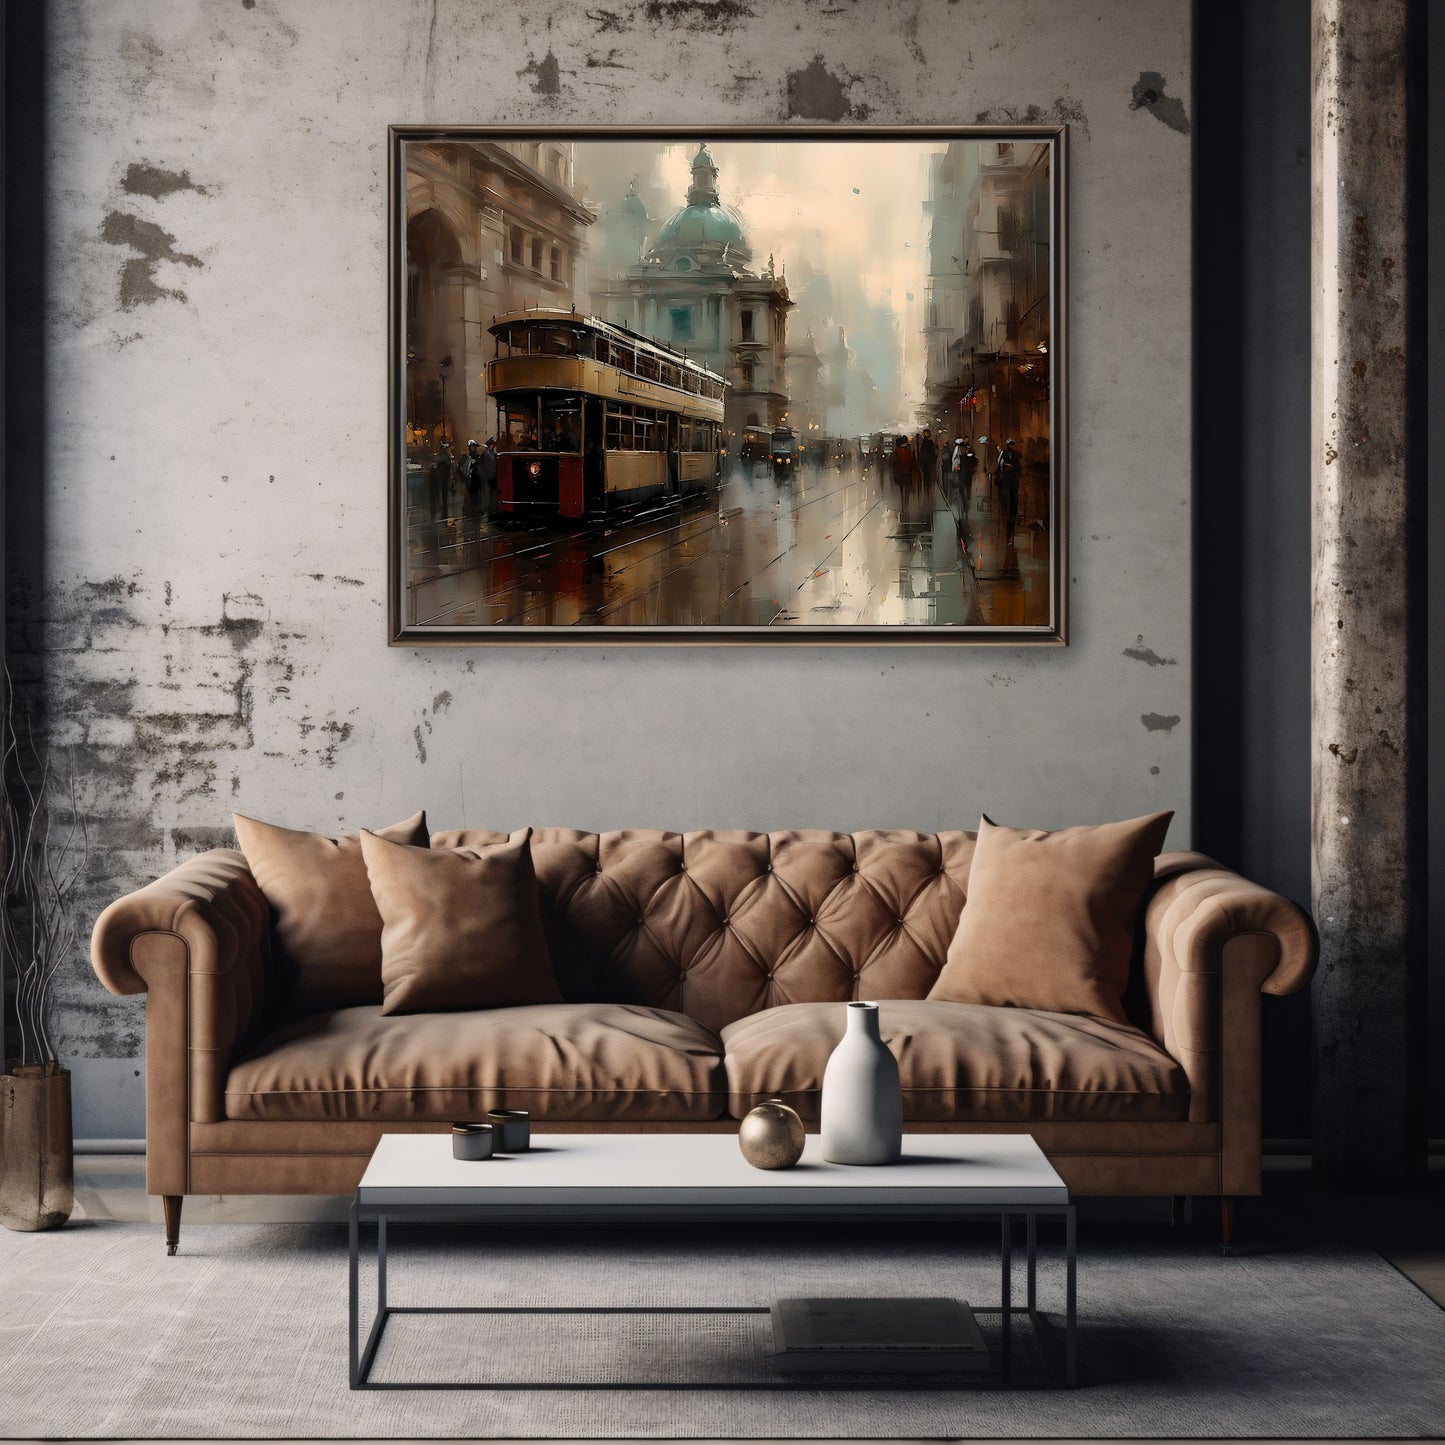 Historic London Street 19th Century Vintage Paper Poster Prints Wall Art Cityscape Impressionistic Painting Nostalgia Artwork Above Couch Decor